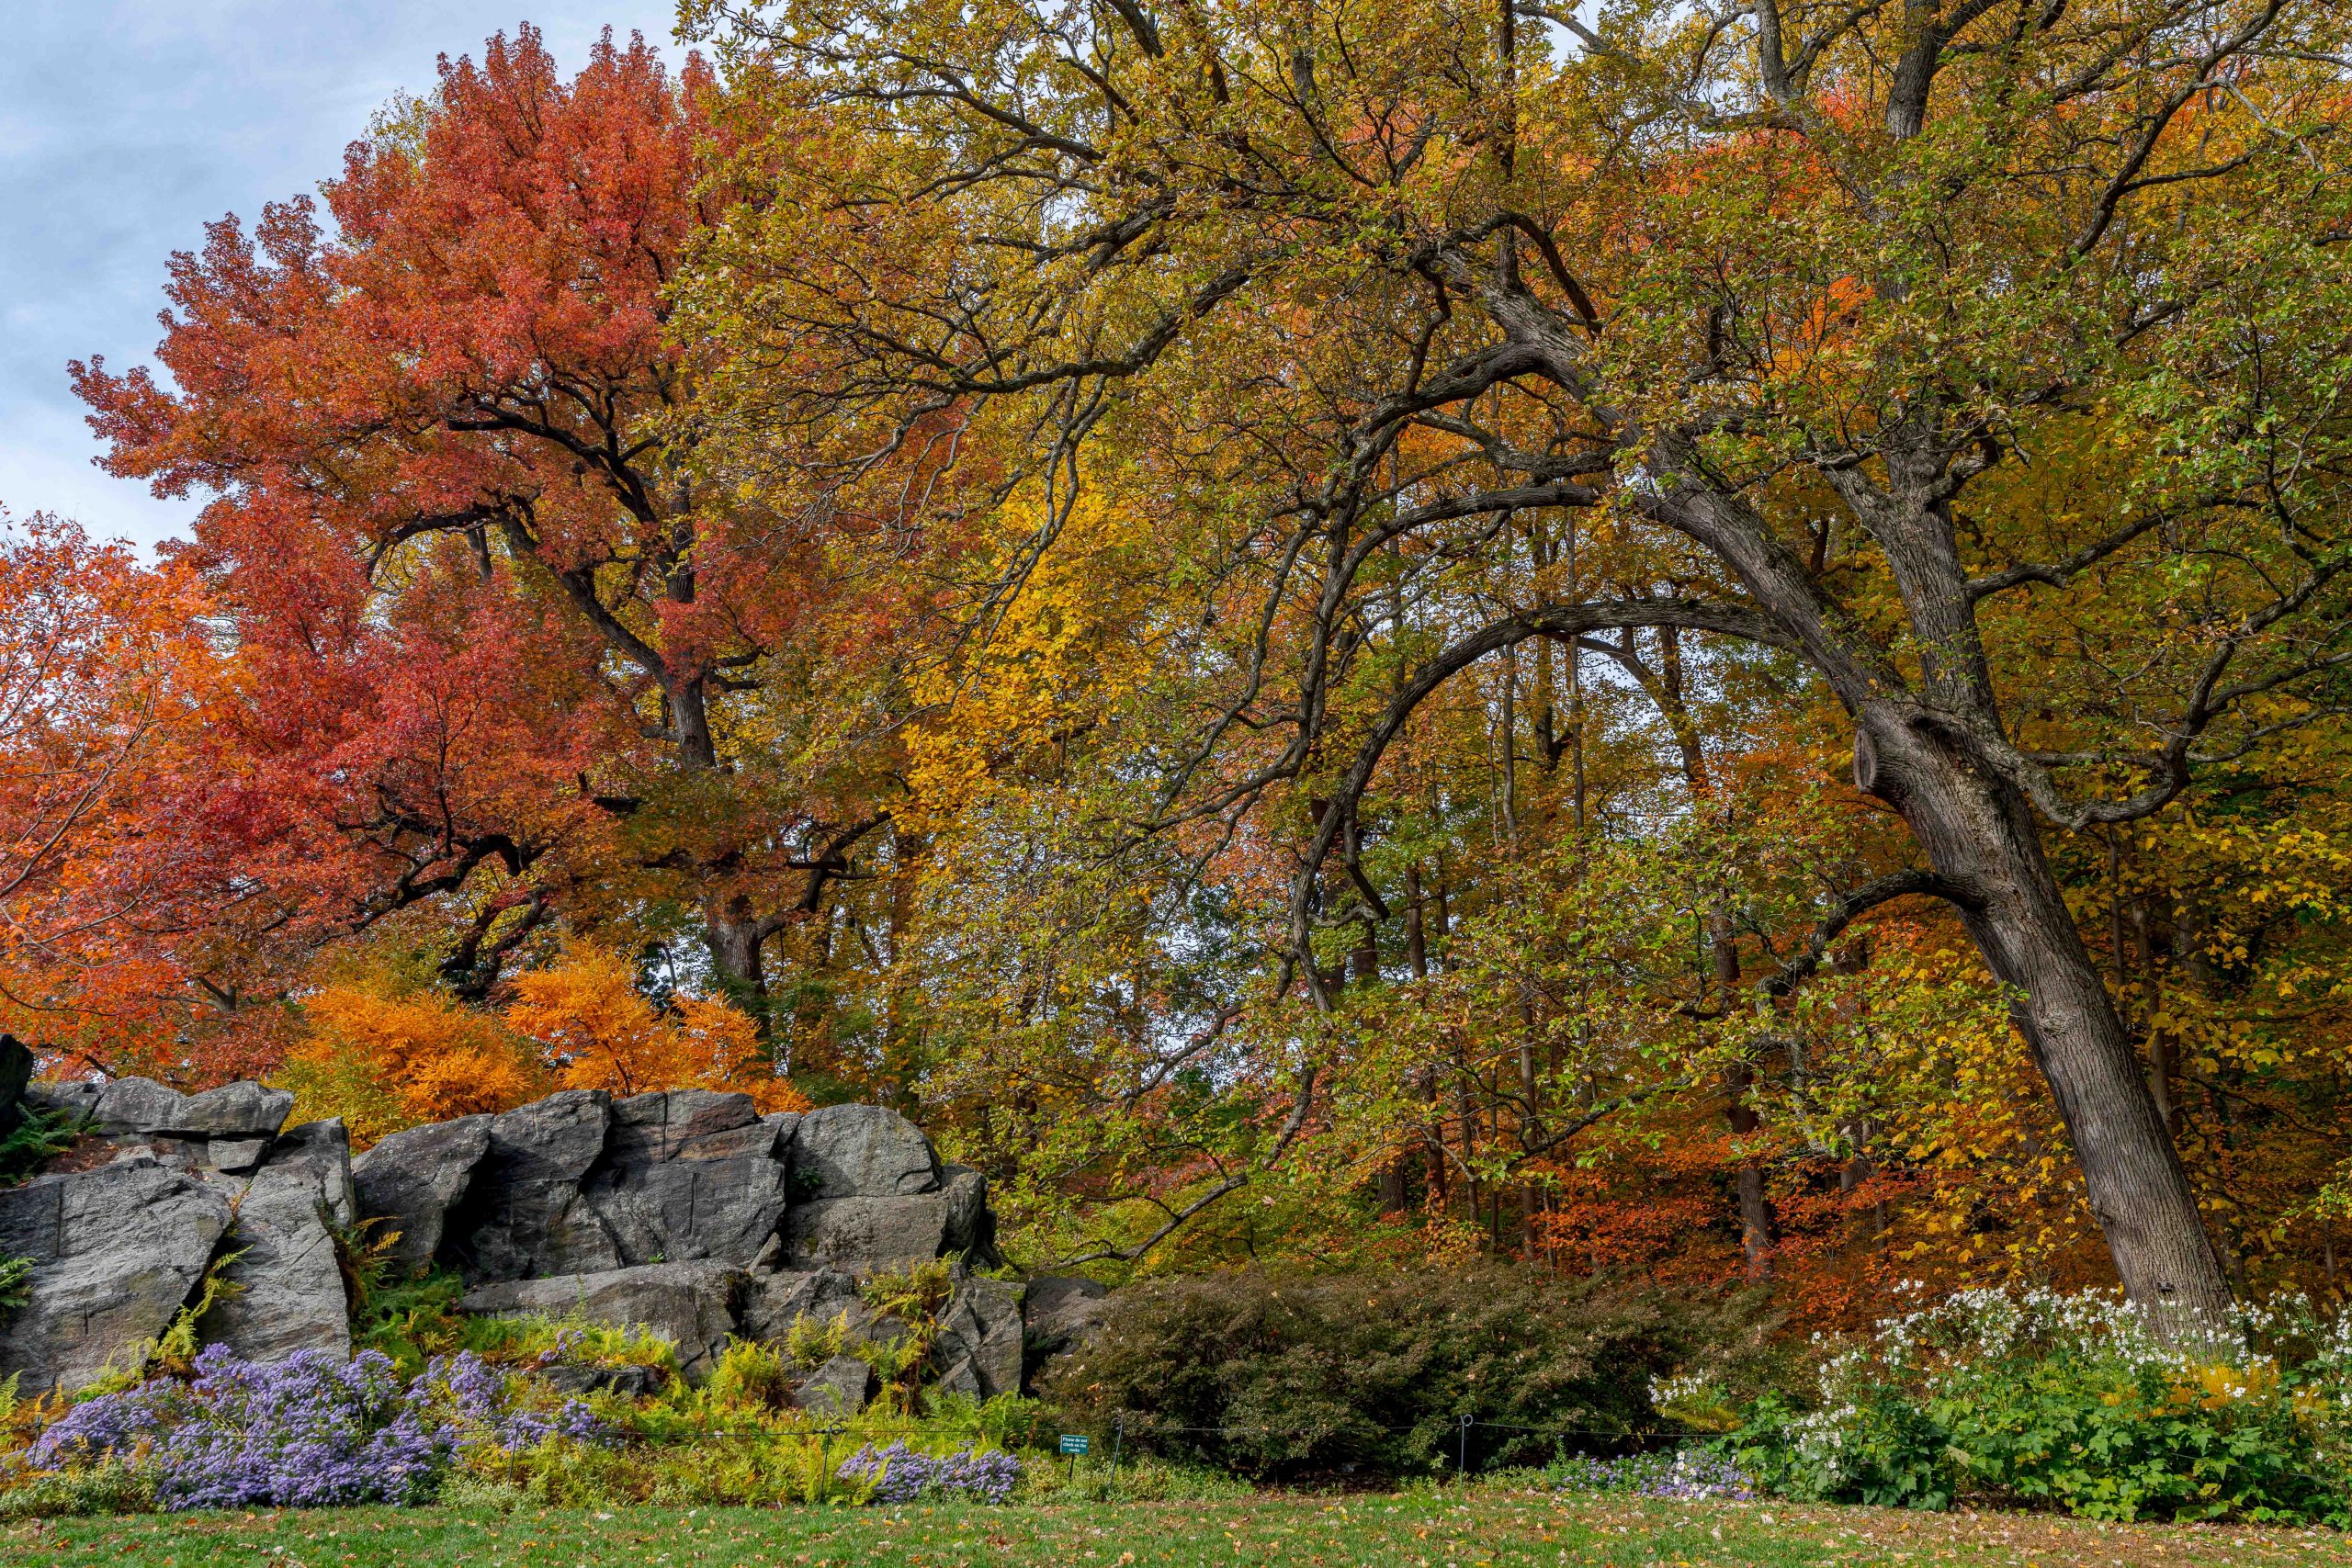 A rocky outcrop in the midst of bright fall trees in orange and yellow